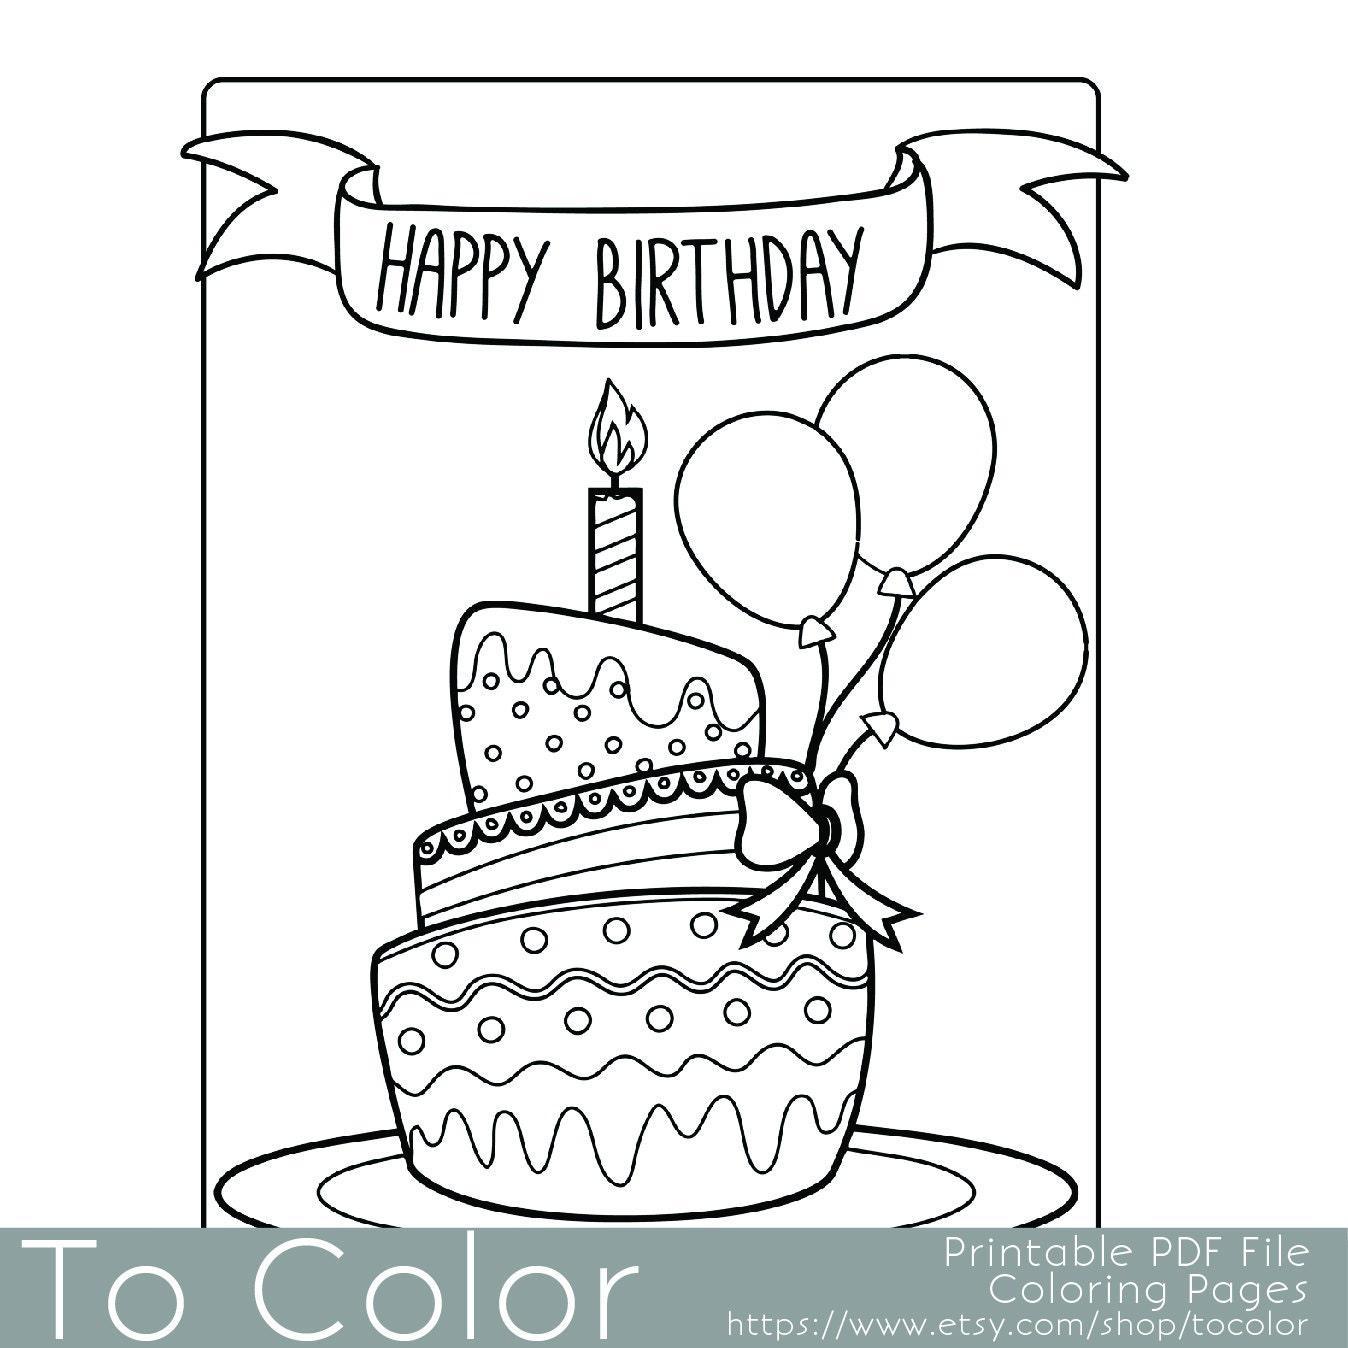 Printable Birthday Coloring Page for Adults PDF / JPG